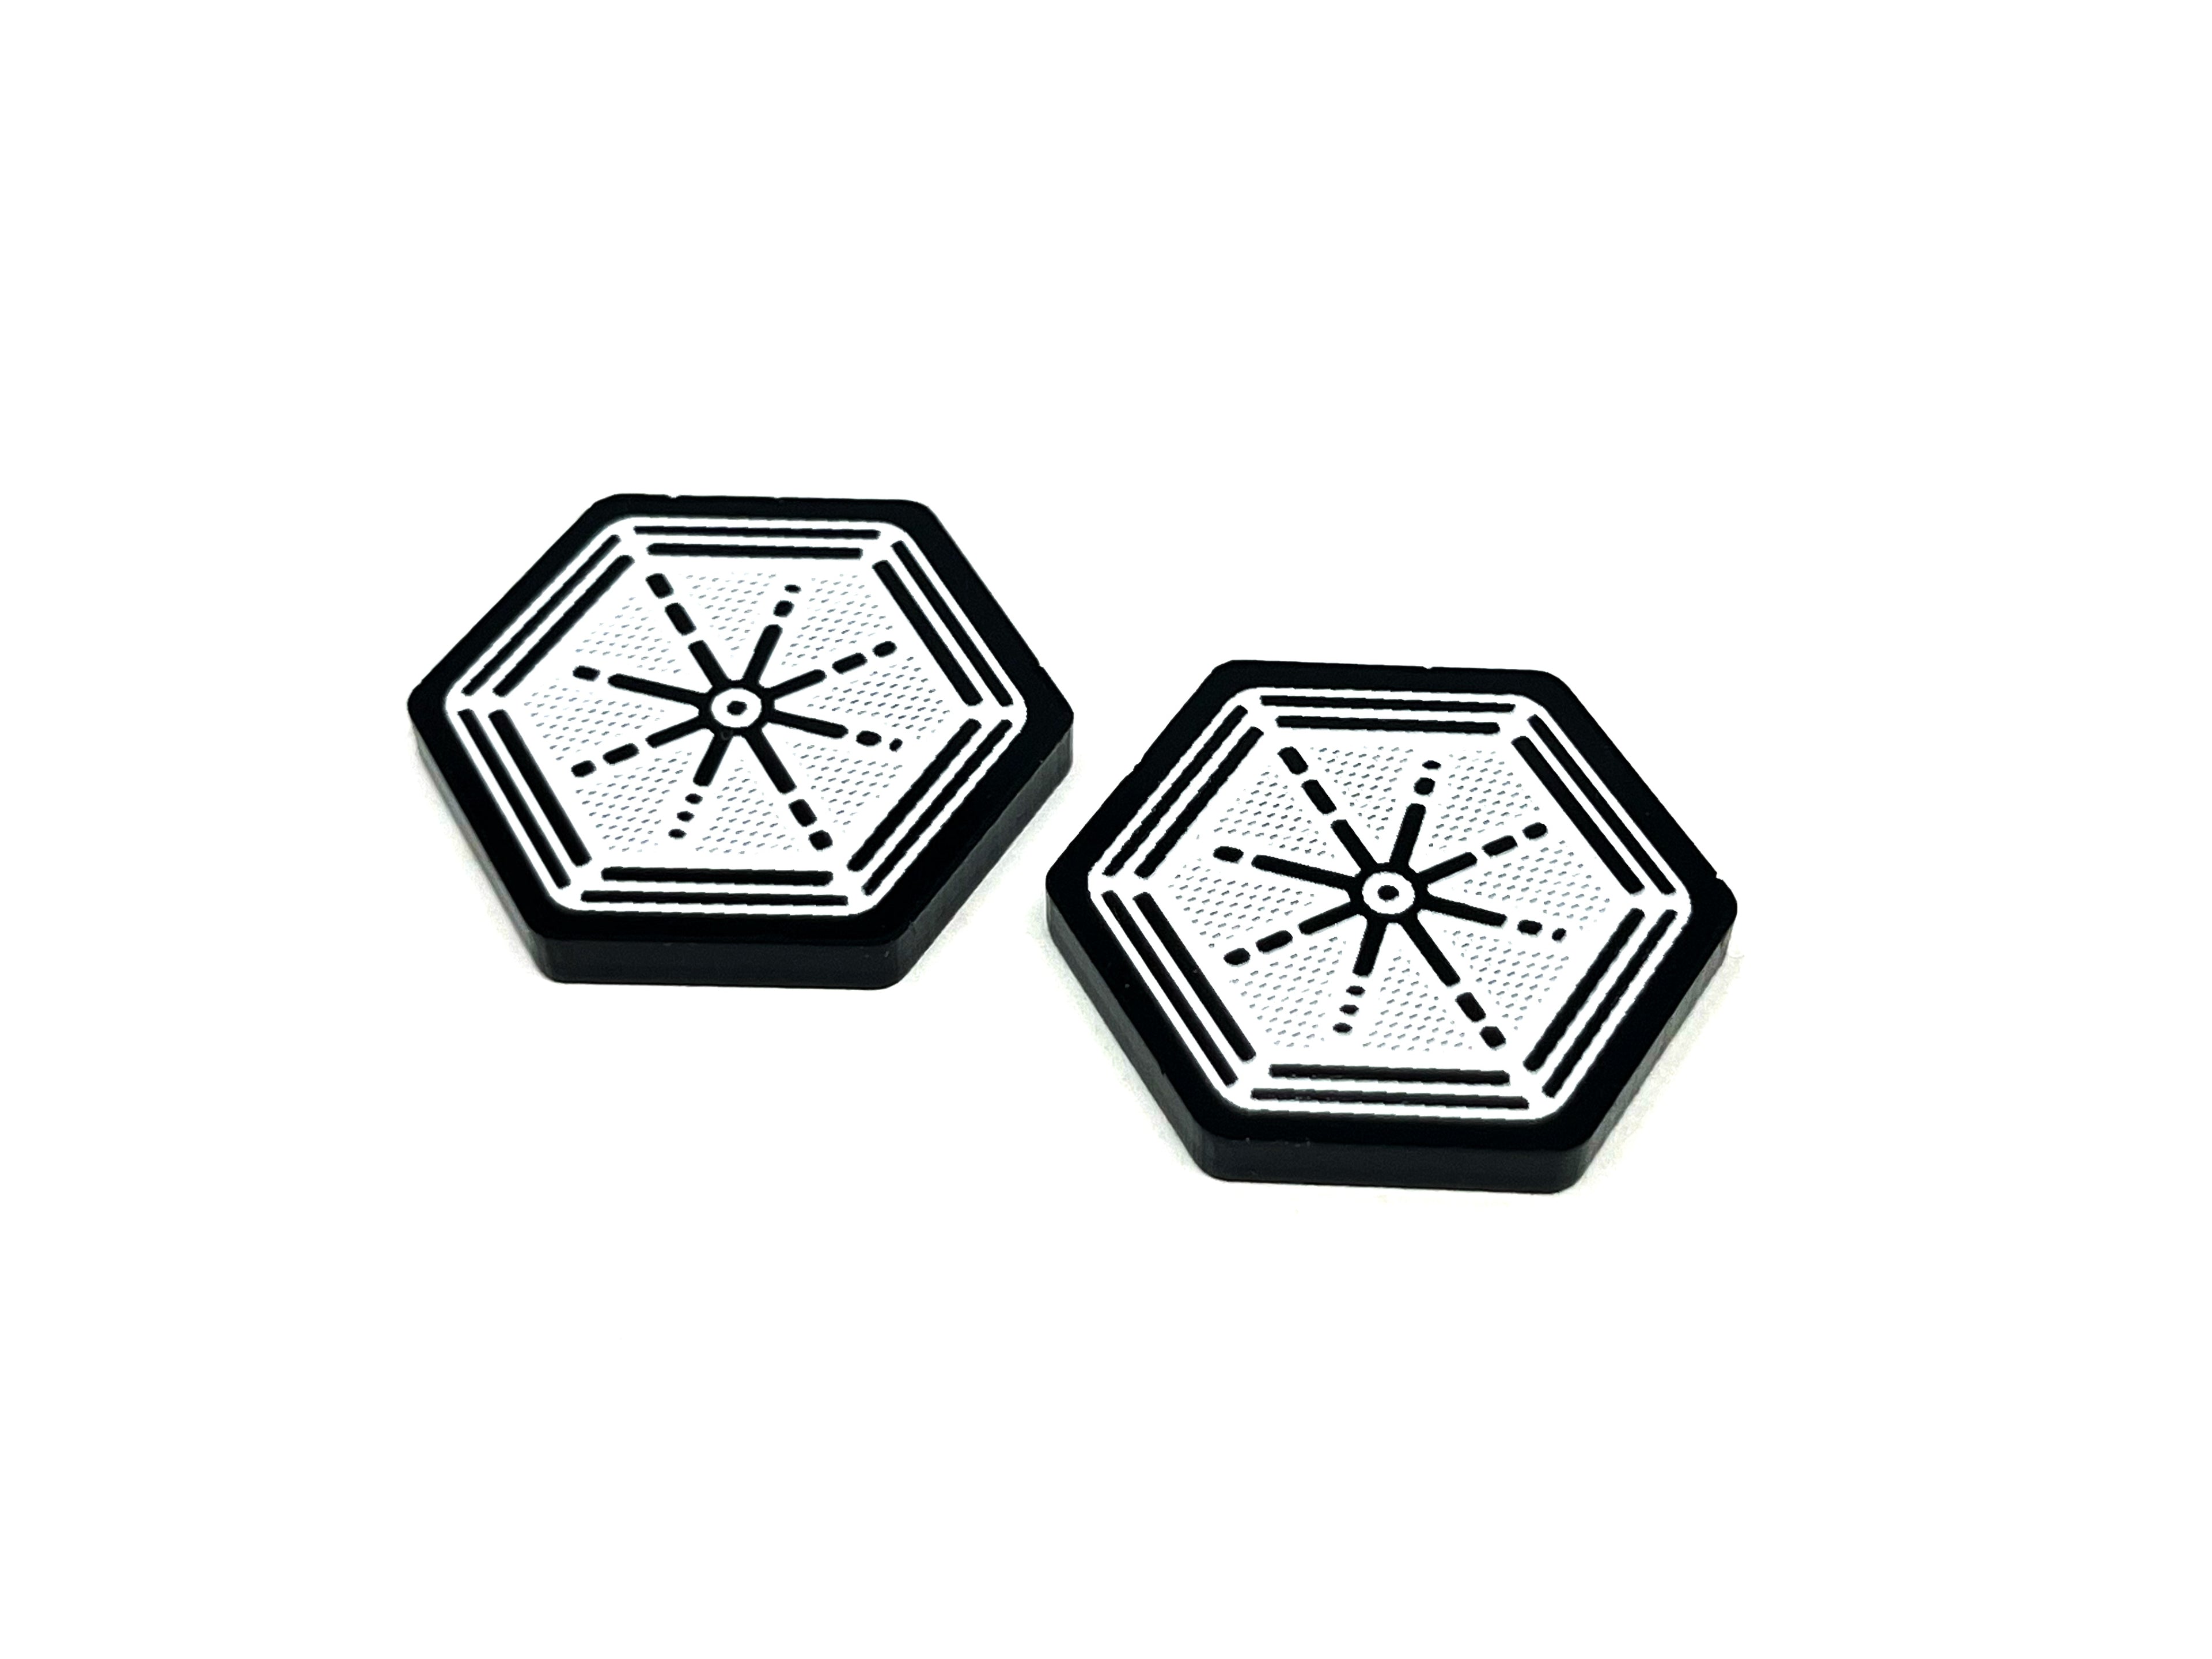 2 x Priority Tokens for Star Wars Shatterpoint (Double Sided)